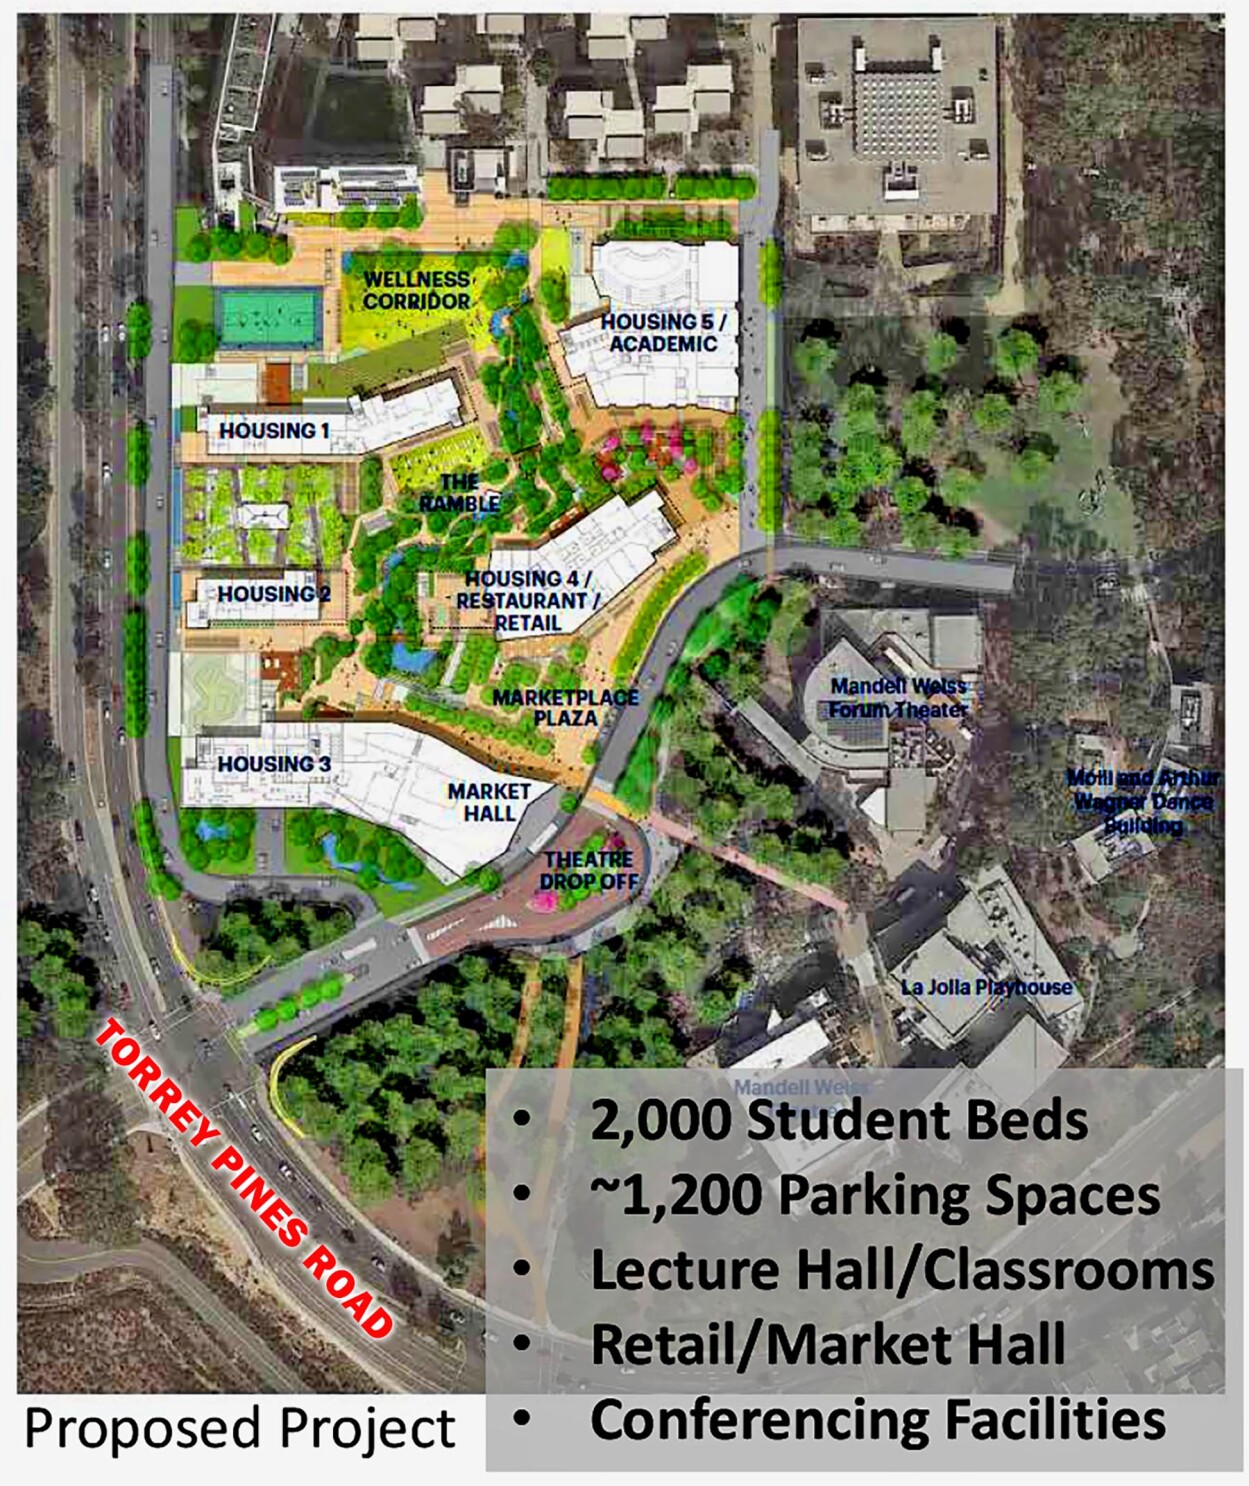 Uc Regents Approve Budget Scope And Financing Of Ucsd S Theatre District Living And Learning Neighborhood La Jolla Light